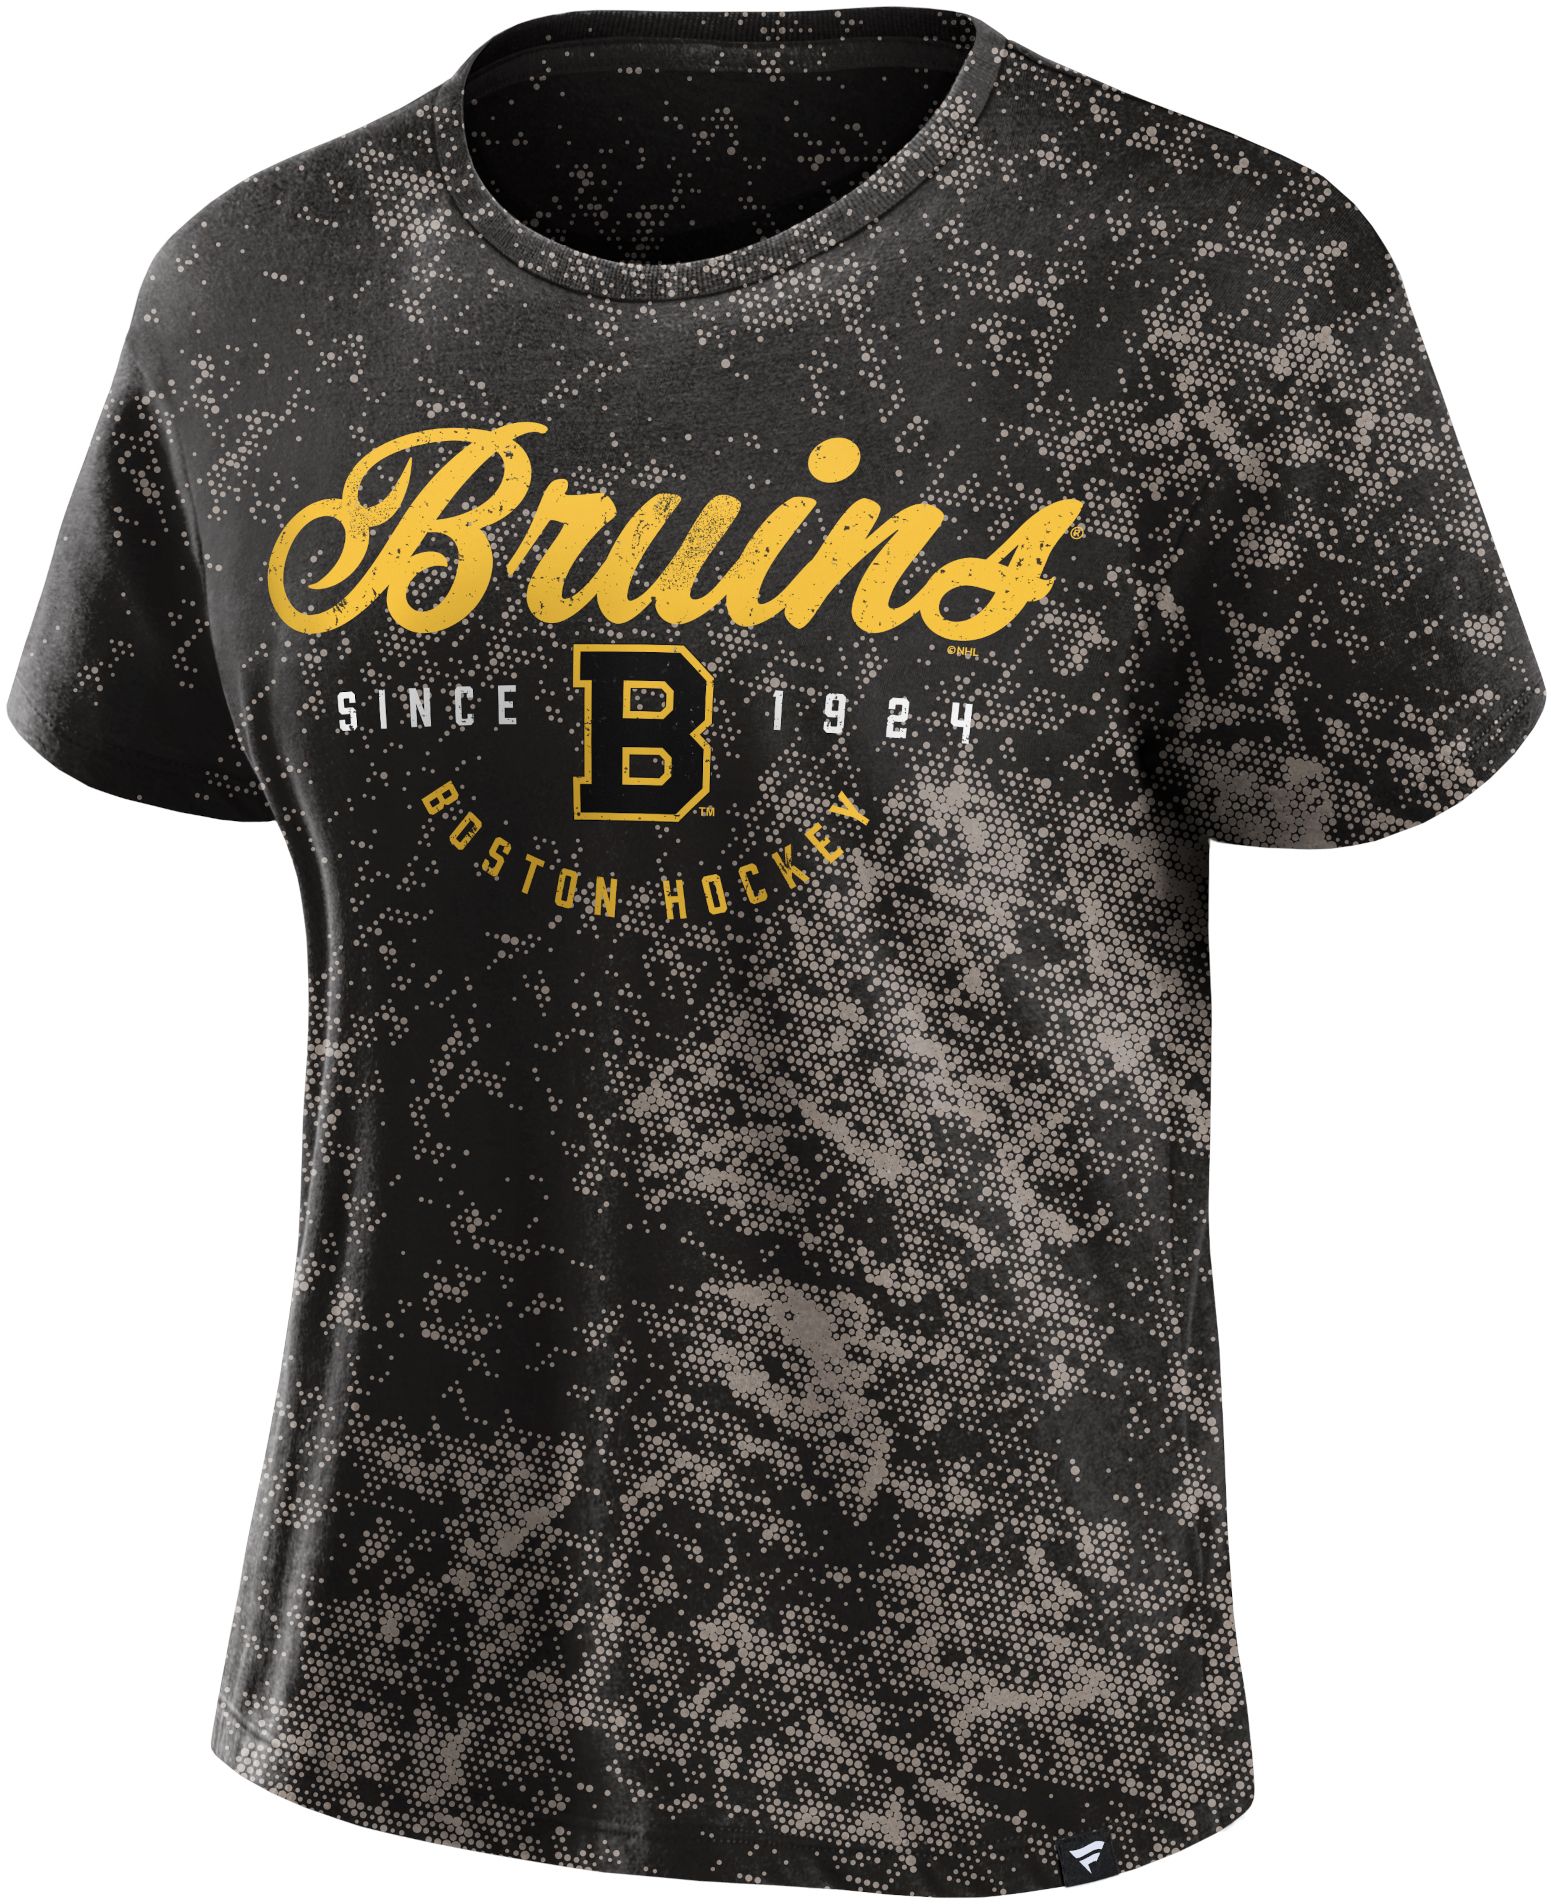 Stock up on Bruins gear this Black Friday 🏒 - BOStoday